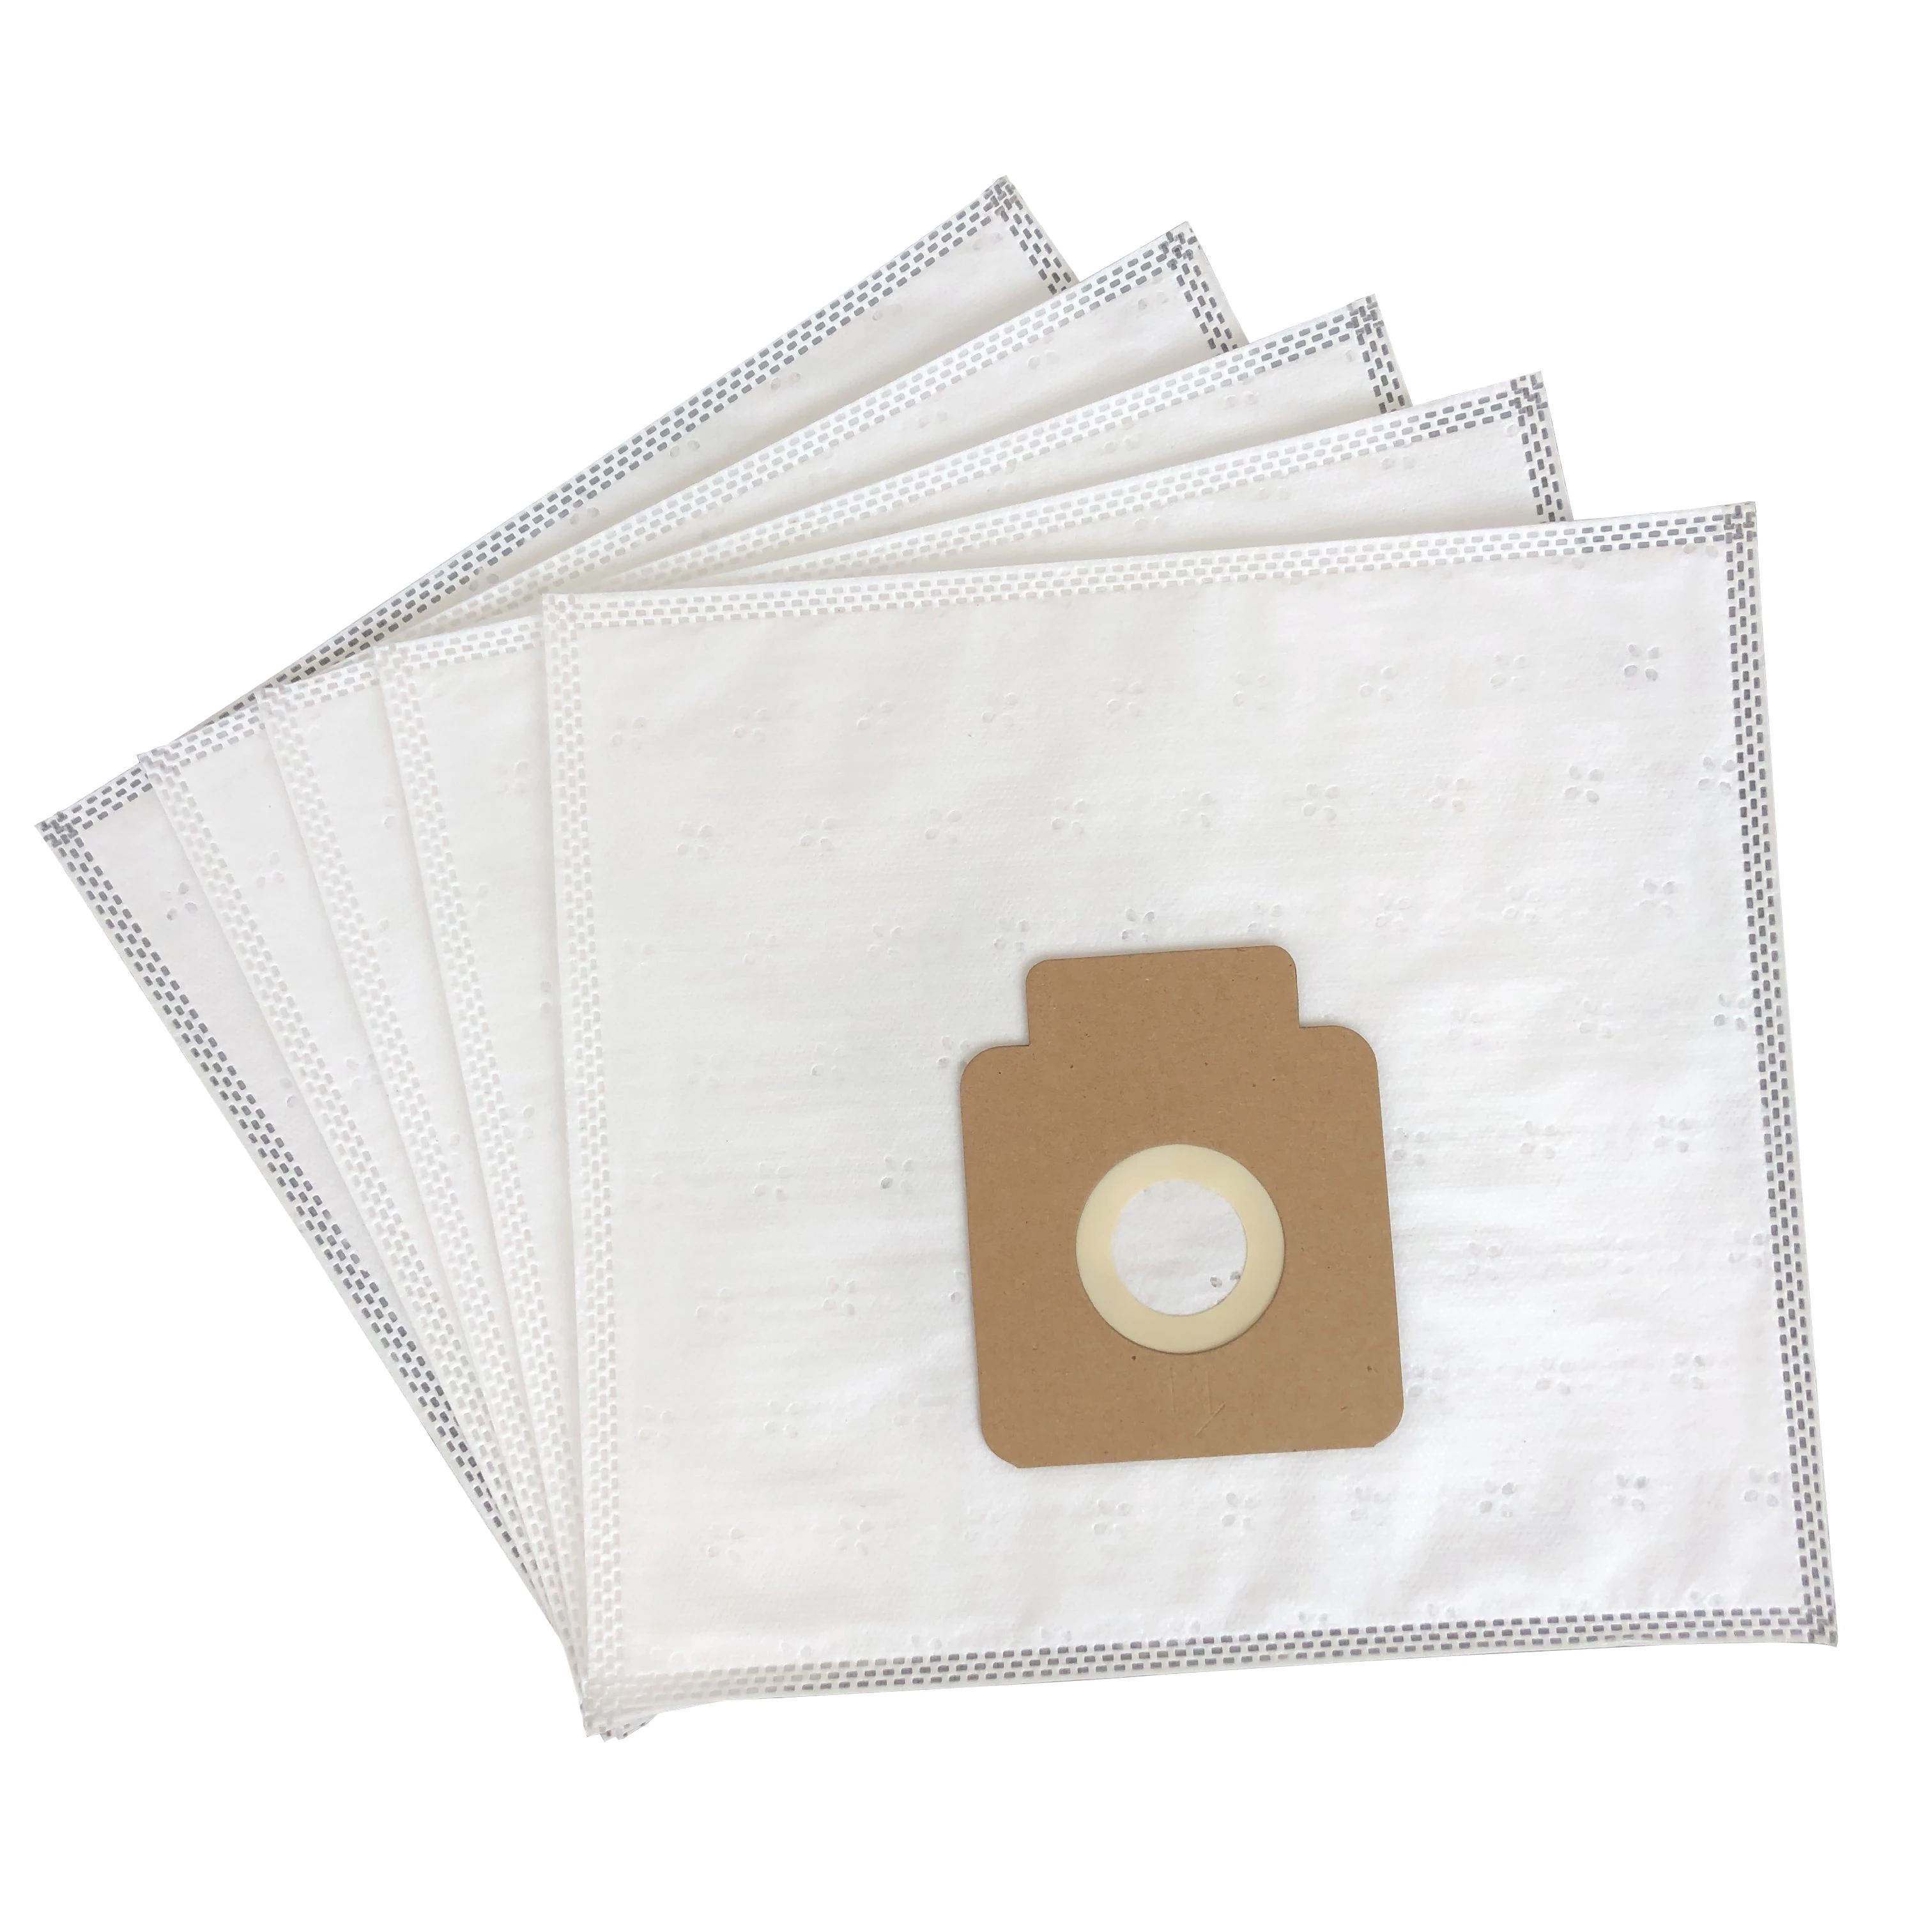 Cleanfairy 15pcs Vacuum Cleaner Bags Compatible with Hoover Freespace Sp... - $35.89